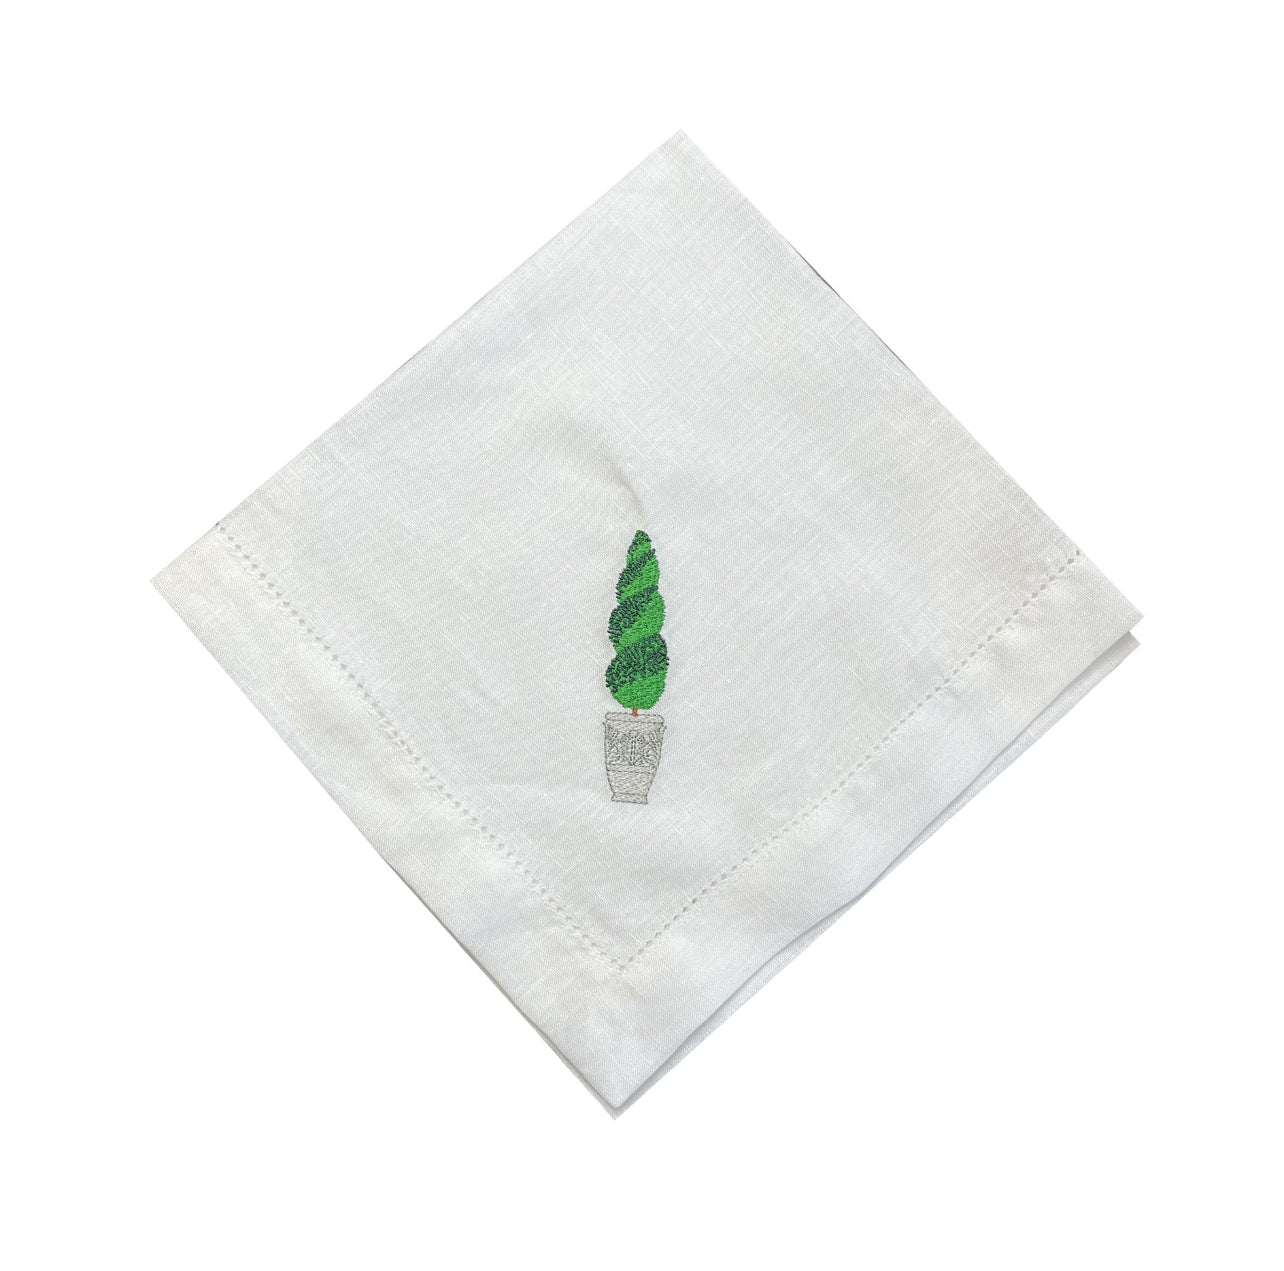 Spiral Topiary Embroidered Napkin